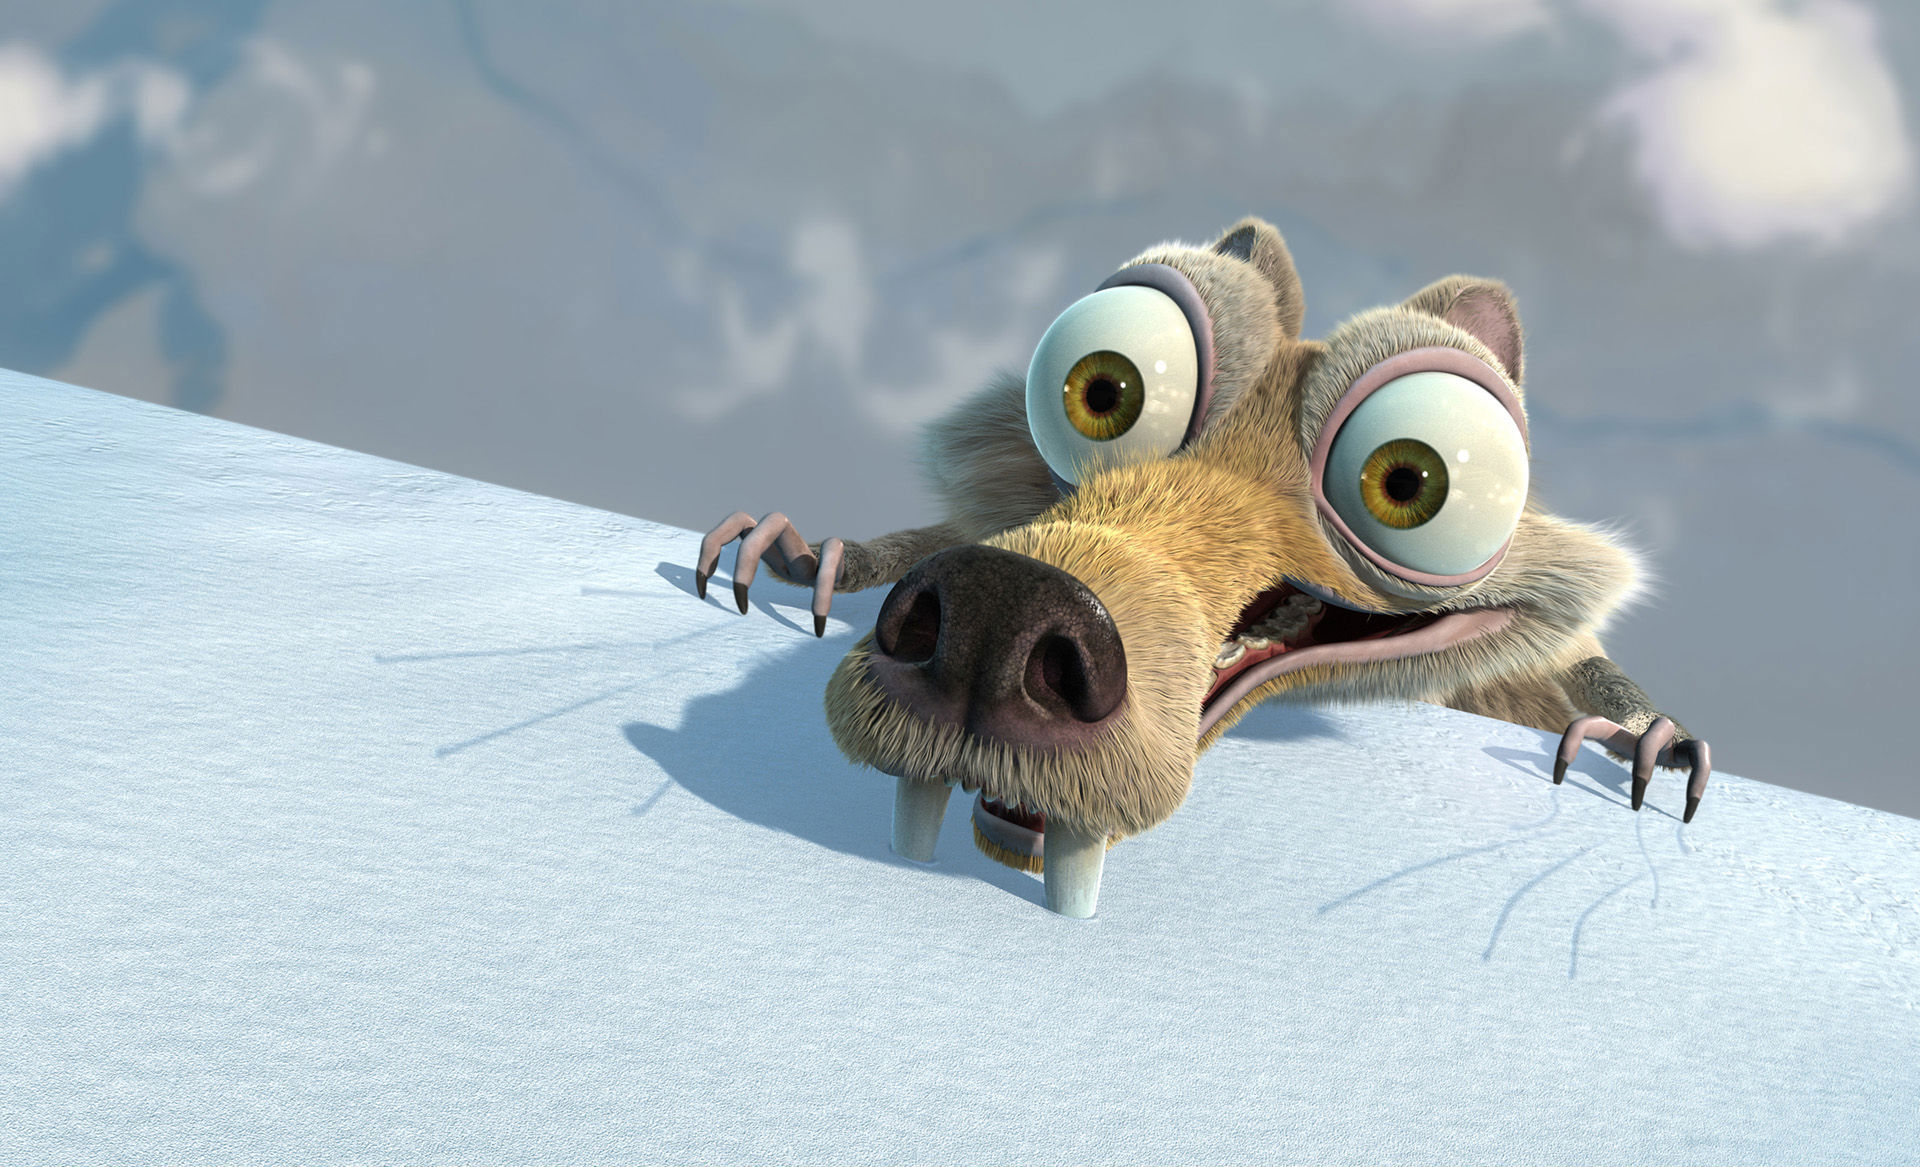 ice age, movie, ice age: dawn of the dinosaurs cell phone wallpapers